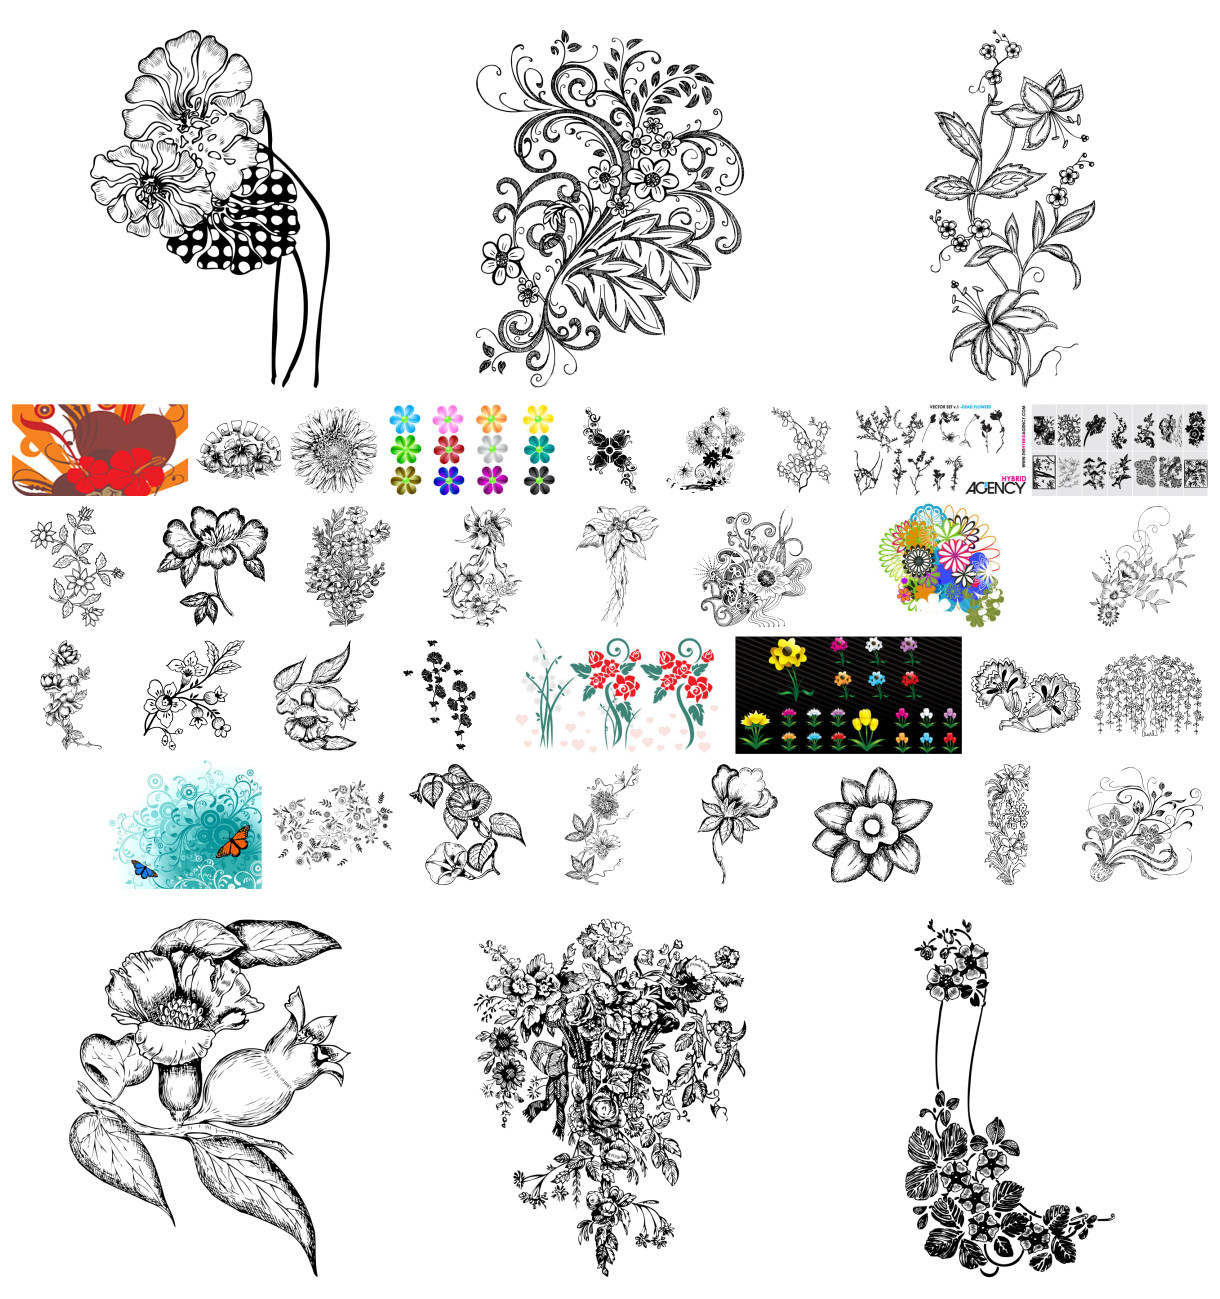 Revamp Your Year with the Flowers Vector Collection